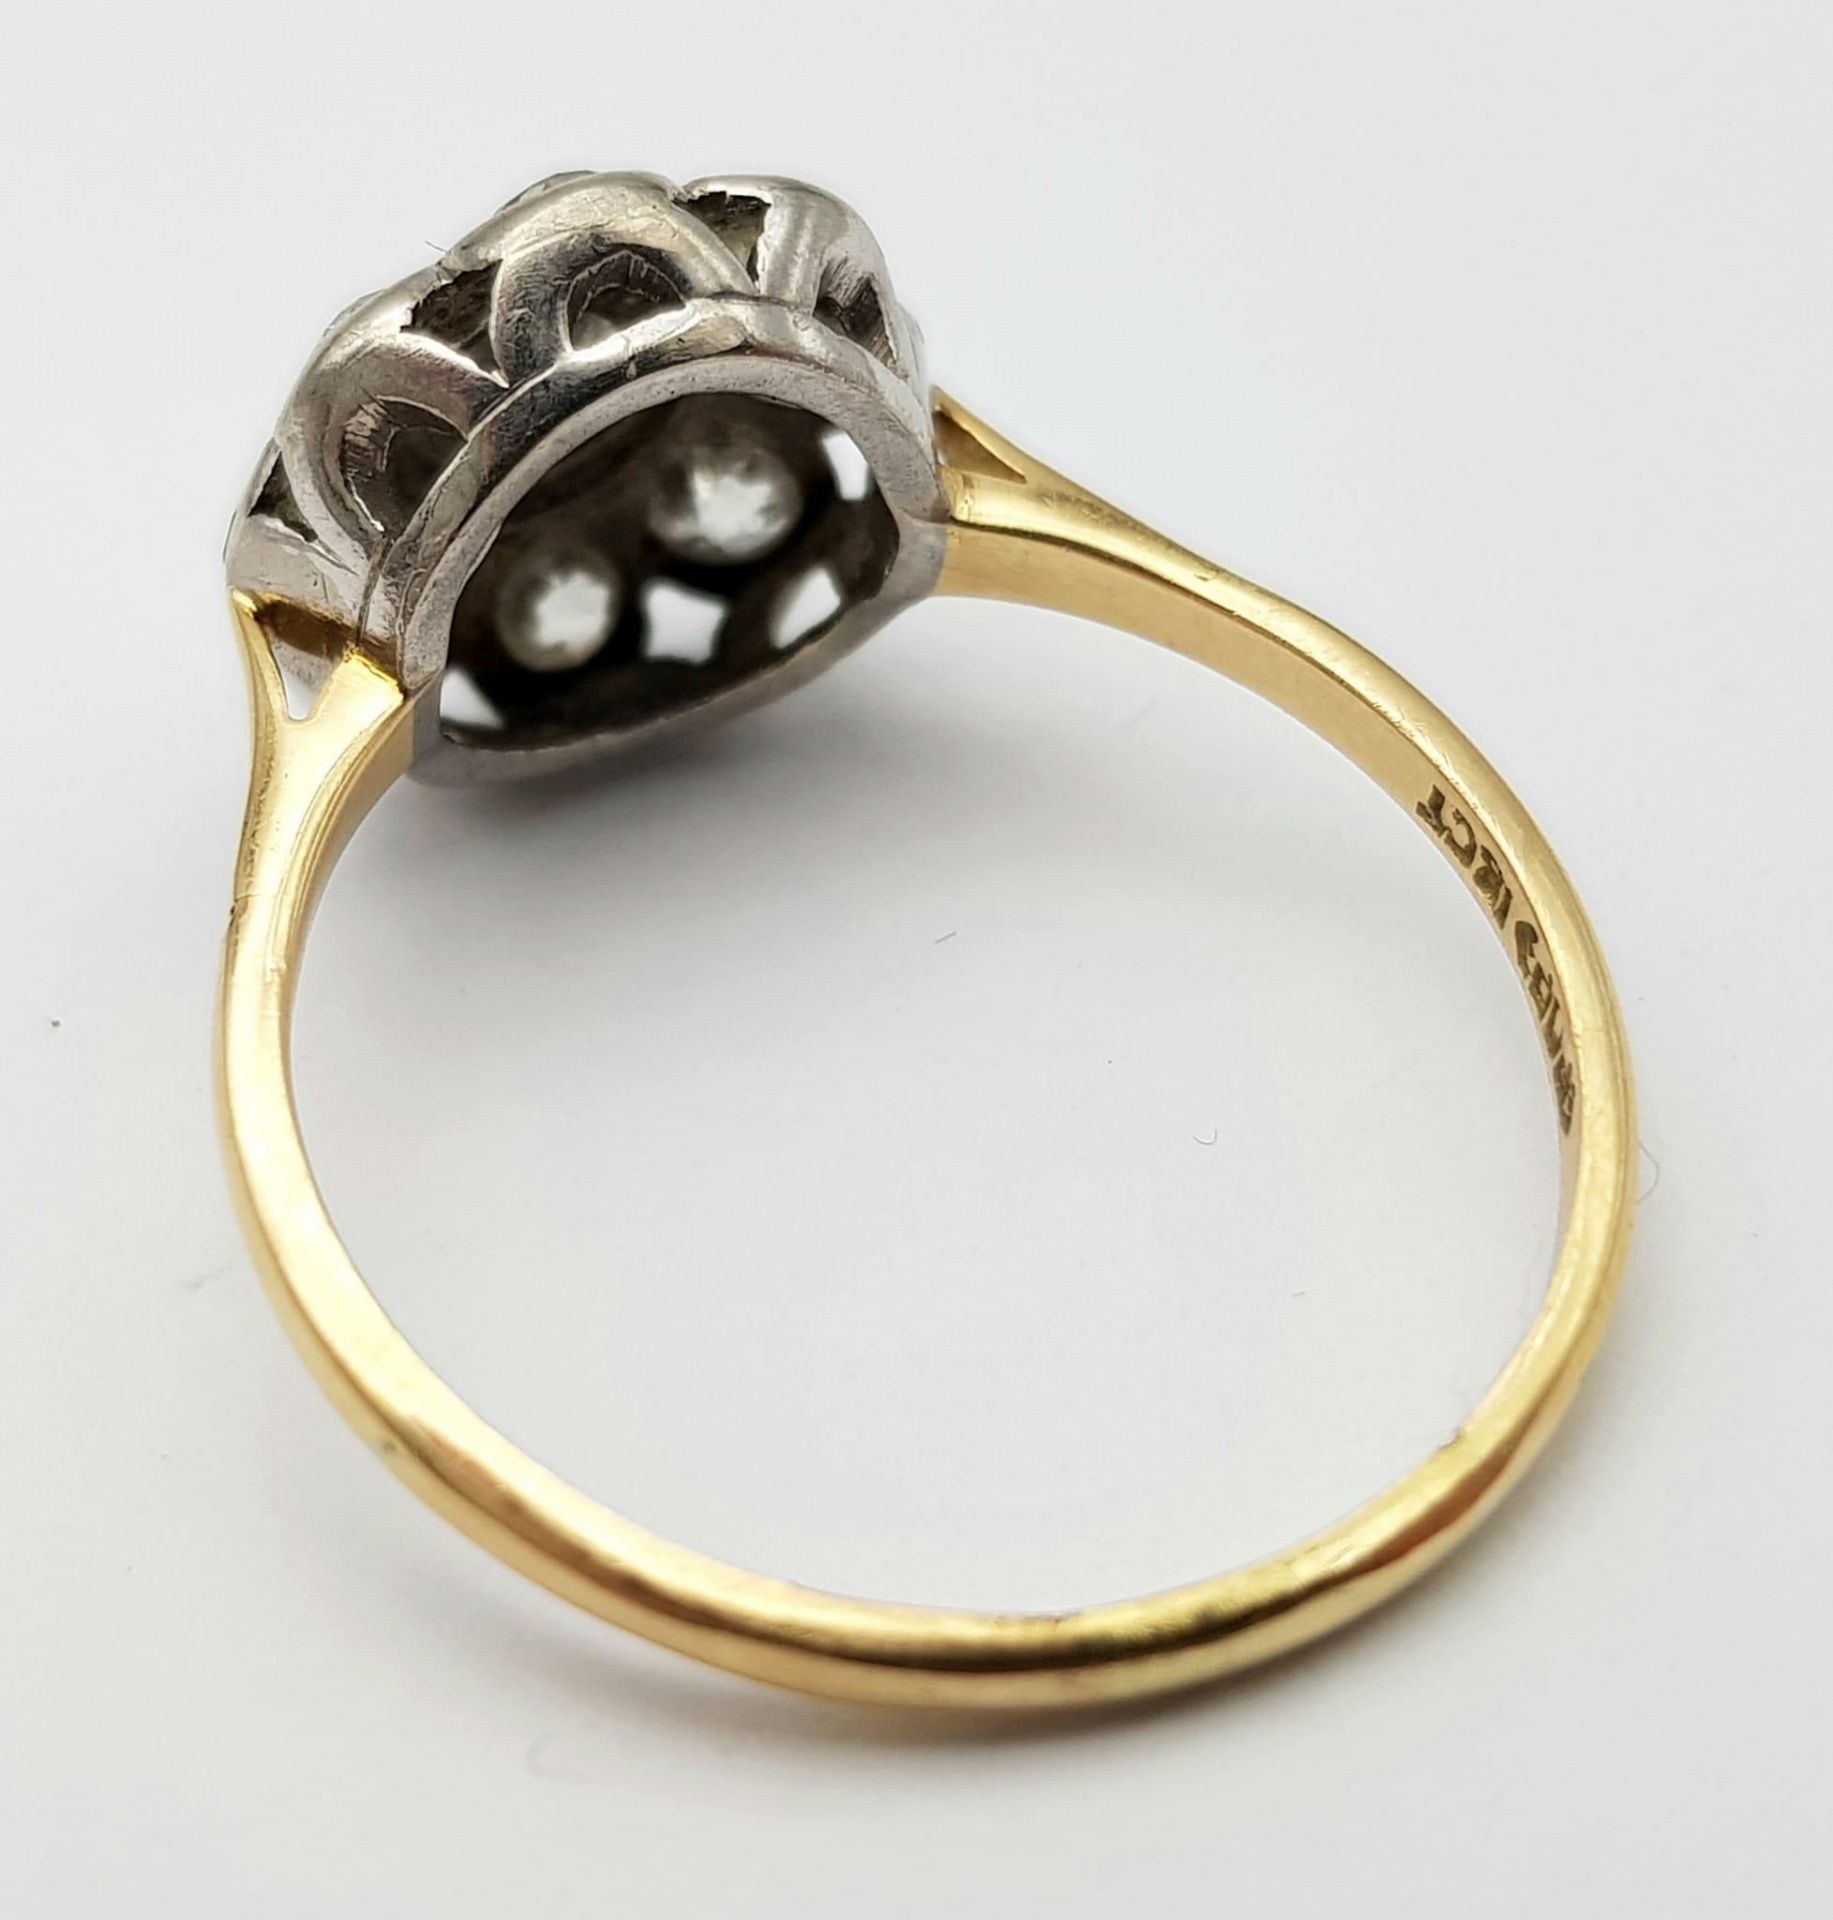 An 18 K yellow gold ring with a large diamond cluster, size: T, weight: 3.4 g. - Image 6 of 10